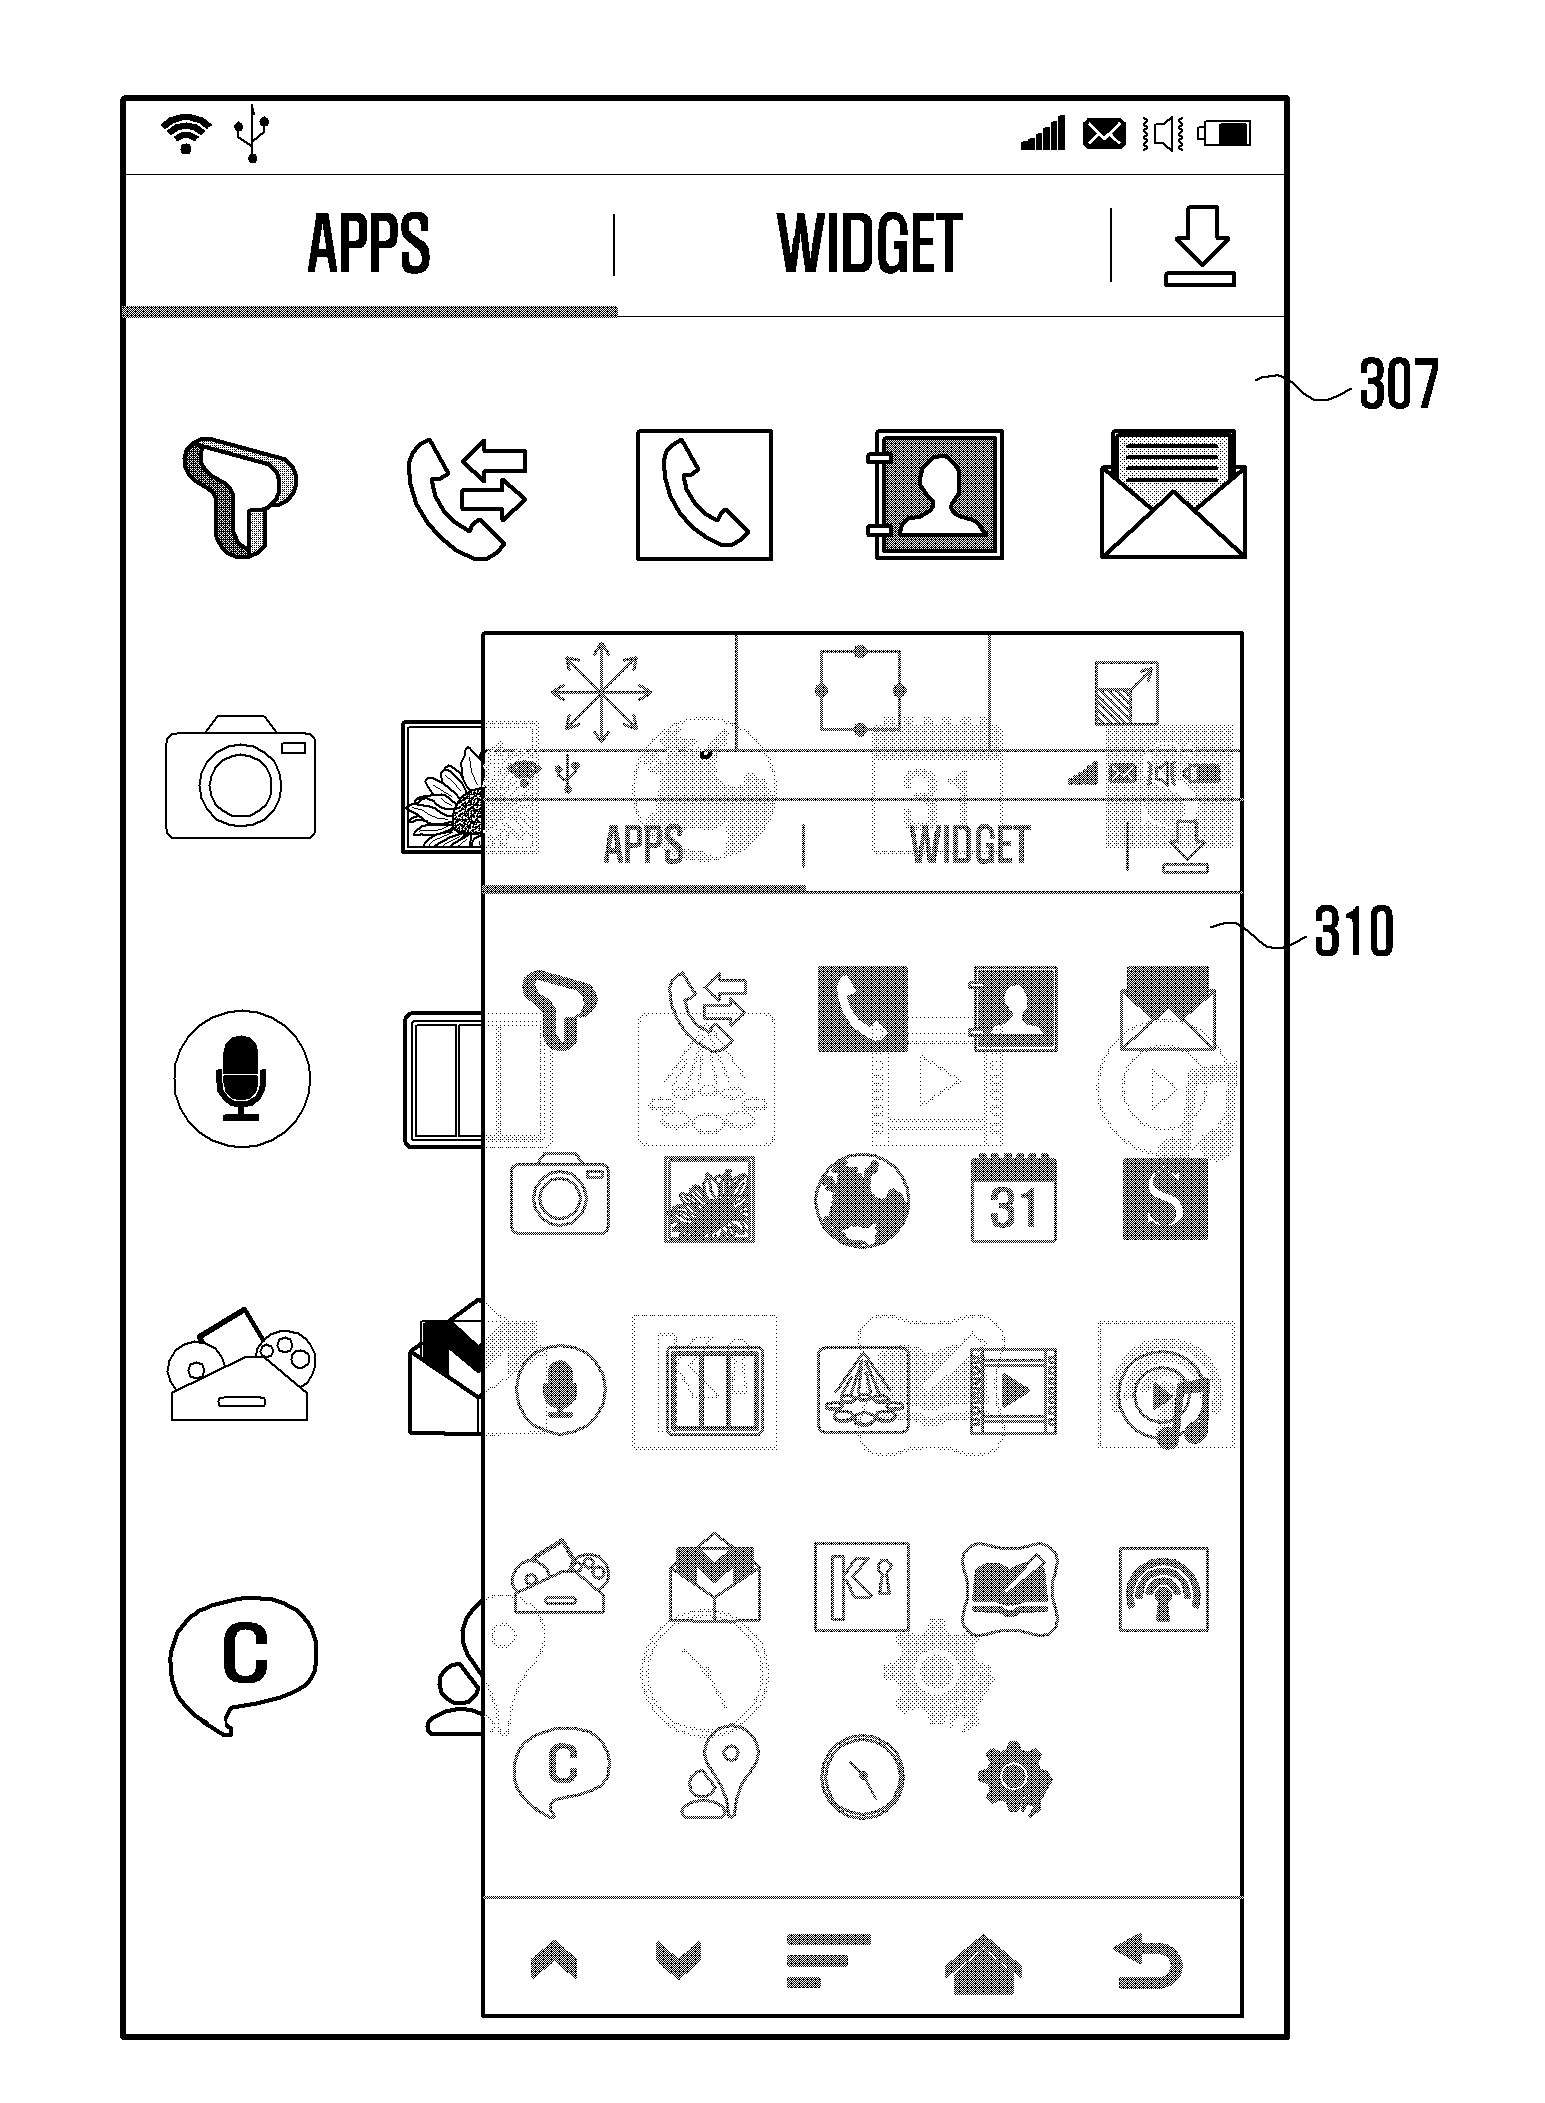 Method and apparatus for displaying picture on portable device